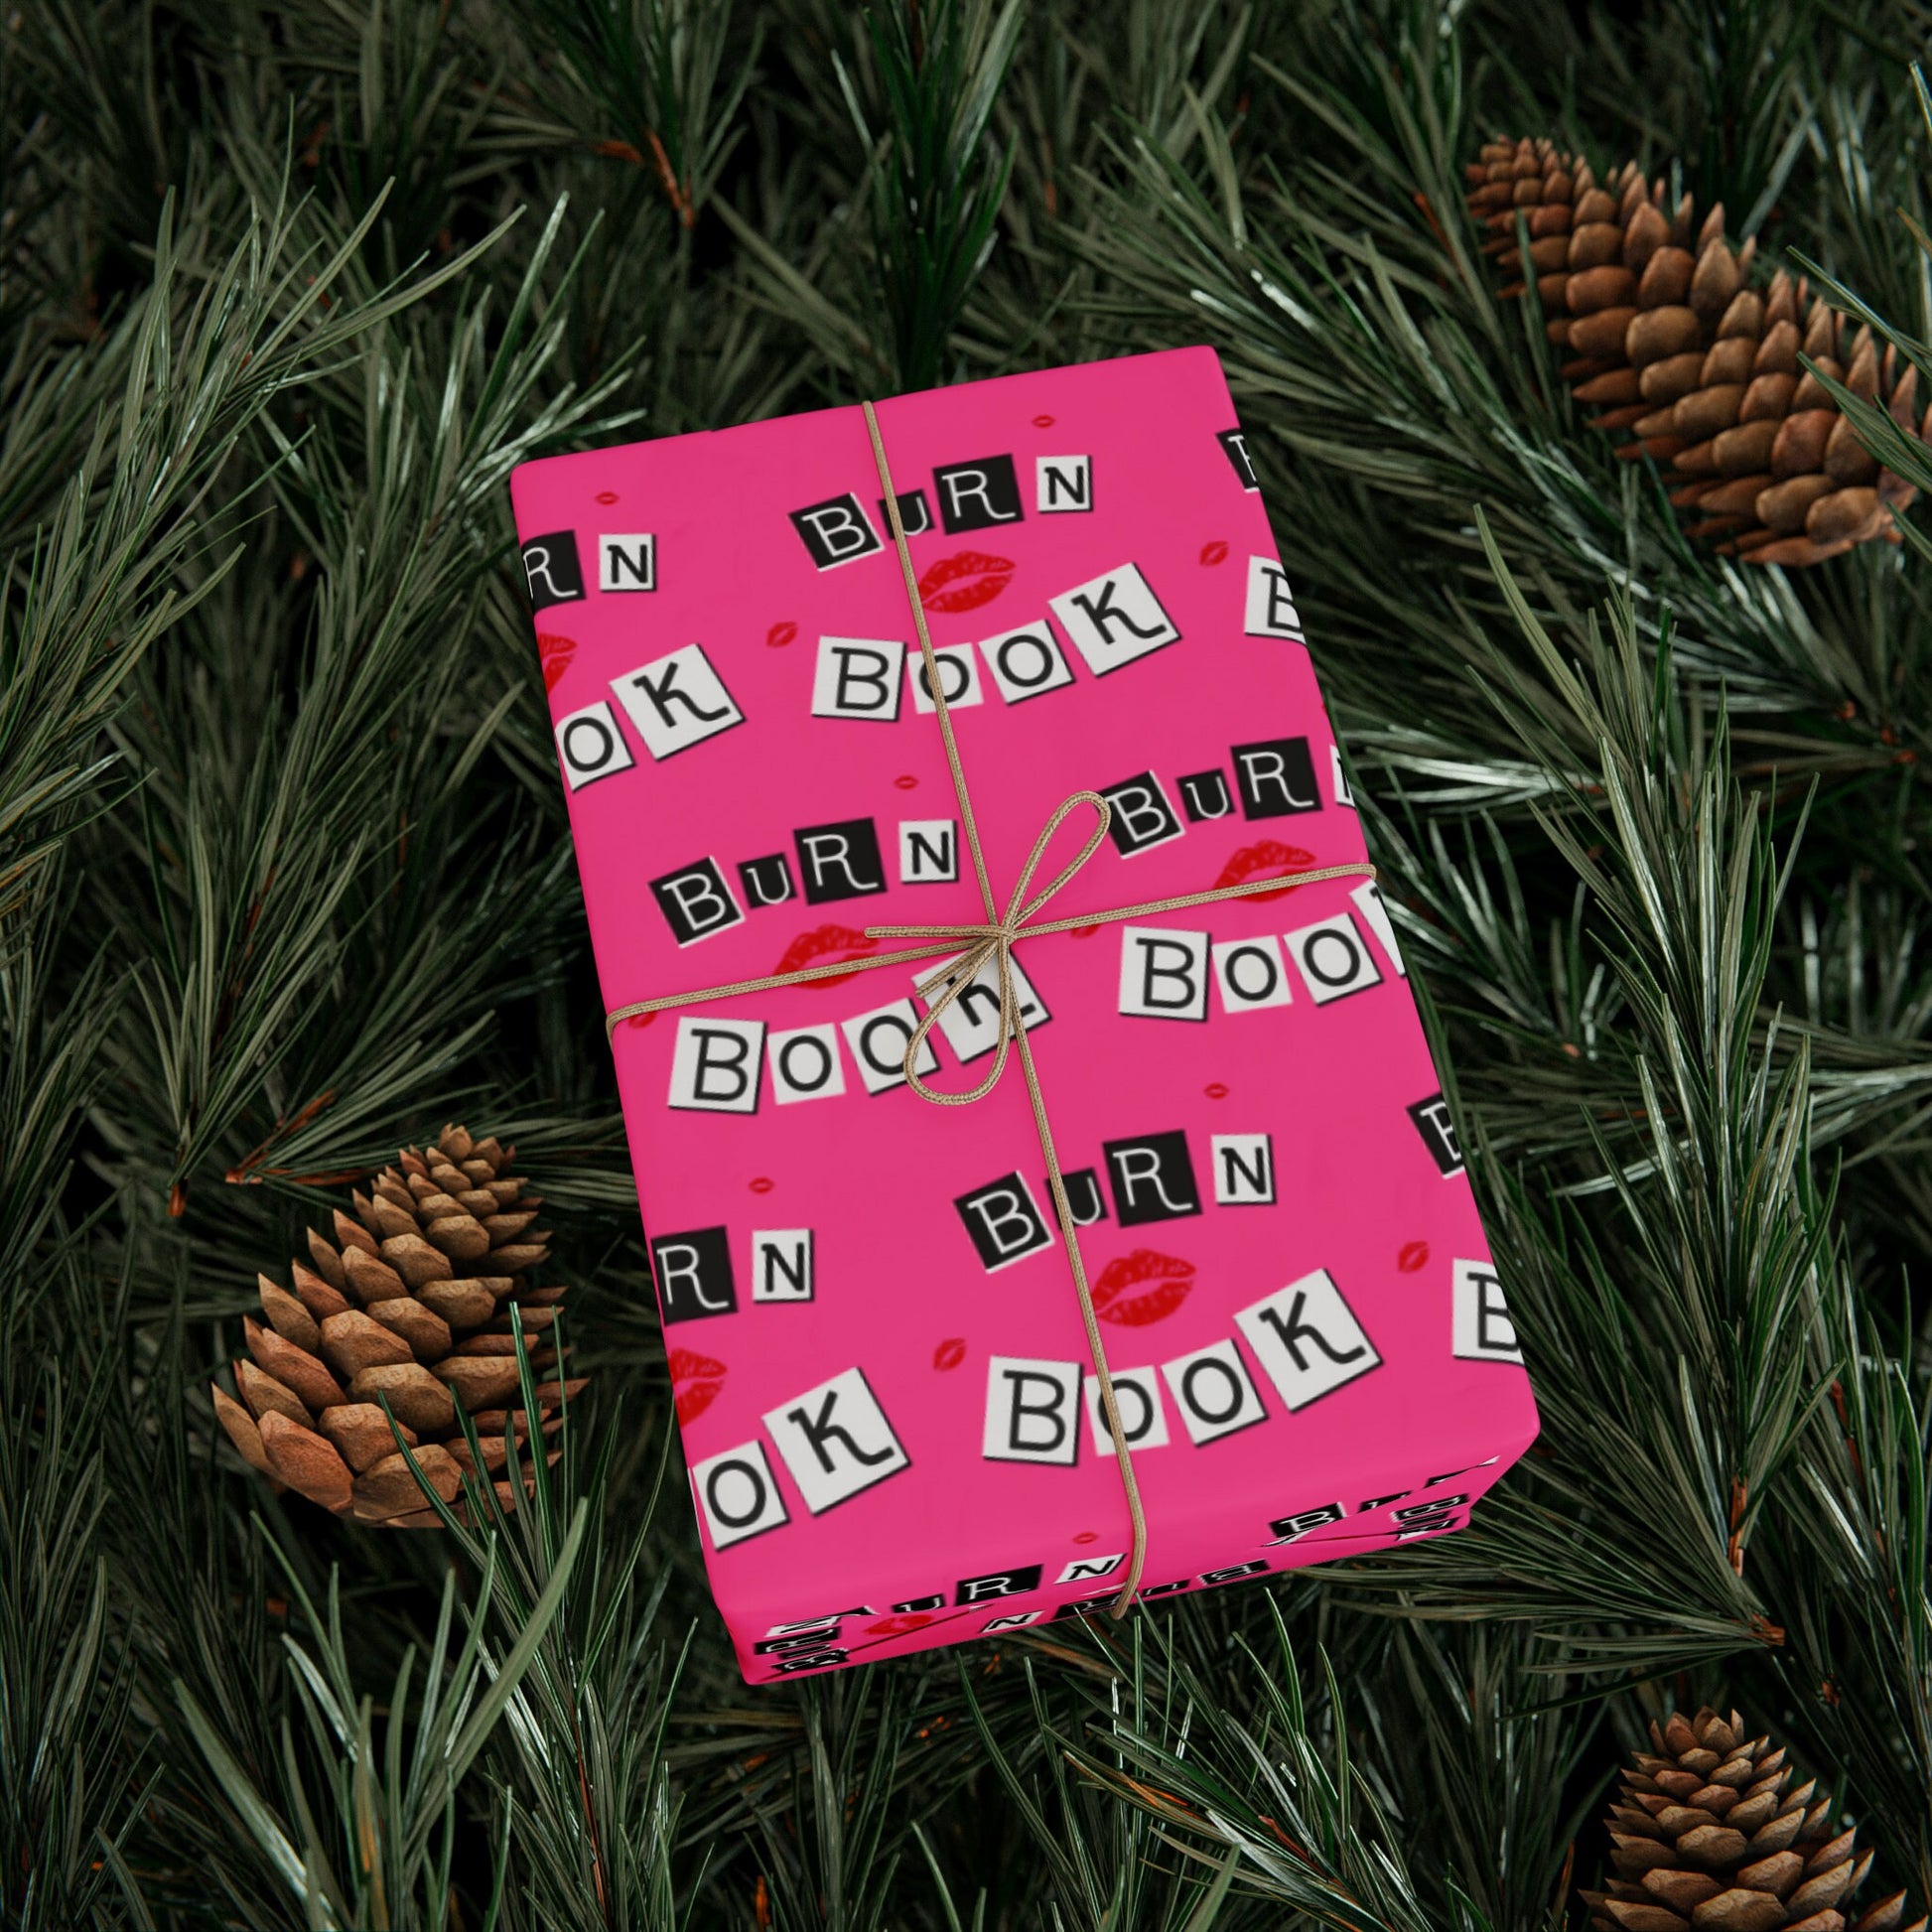 Burn Book Pink Girls Wrapping Paper Roll, Cute y2k 90s Nostalgia, Funny Mean Handmade Gift Present Paper